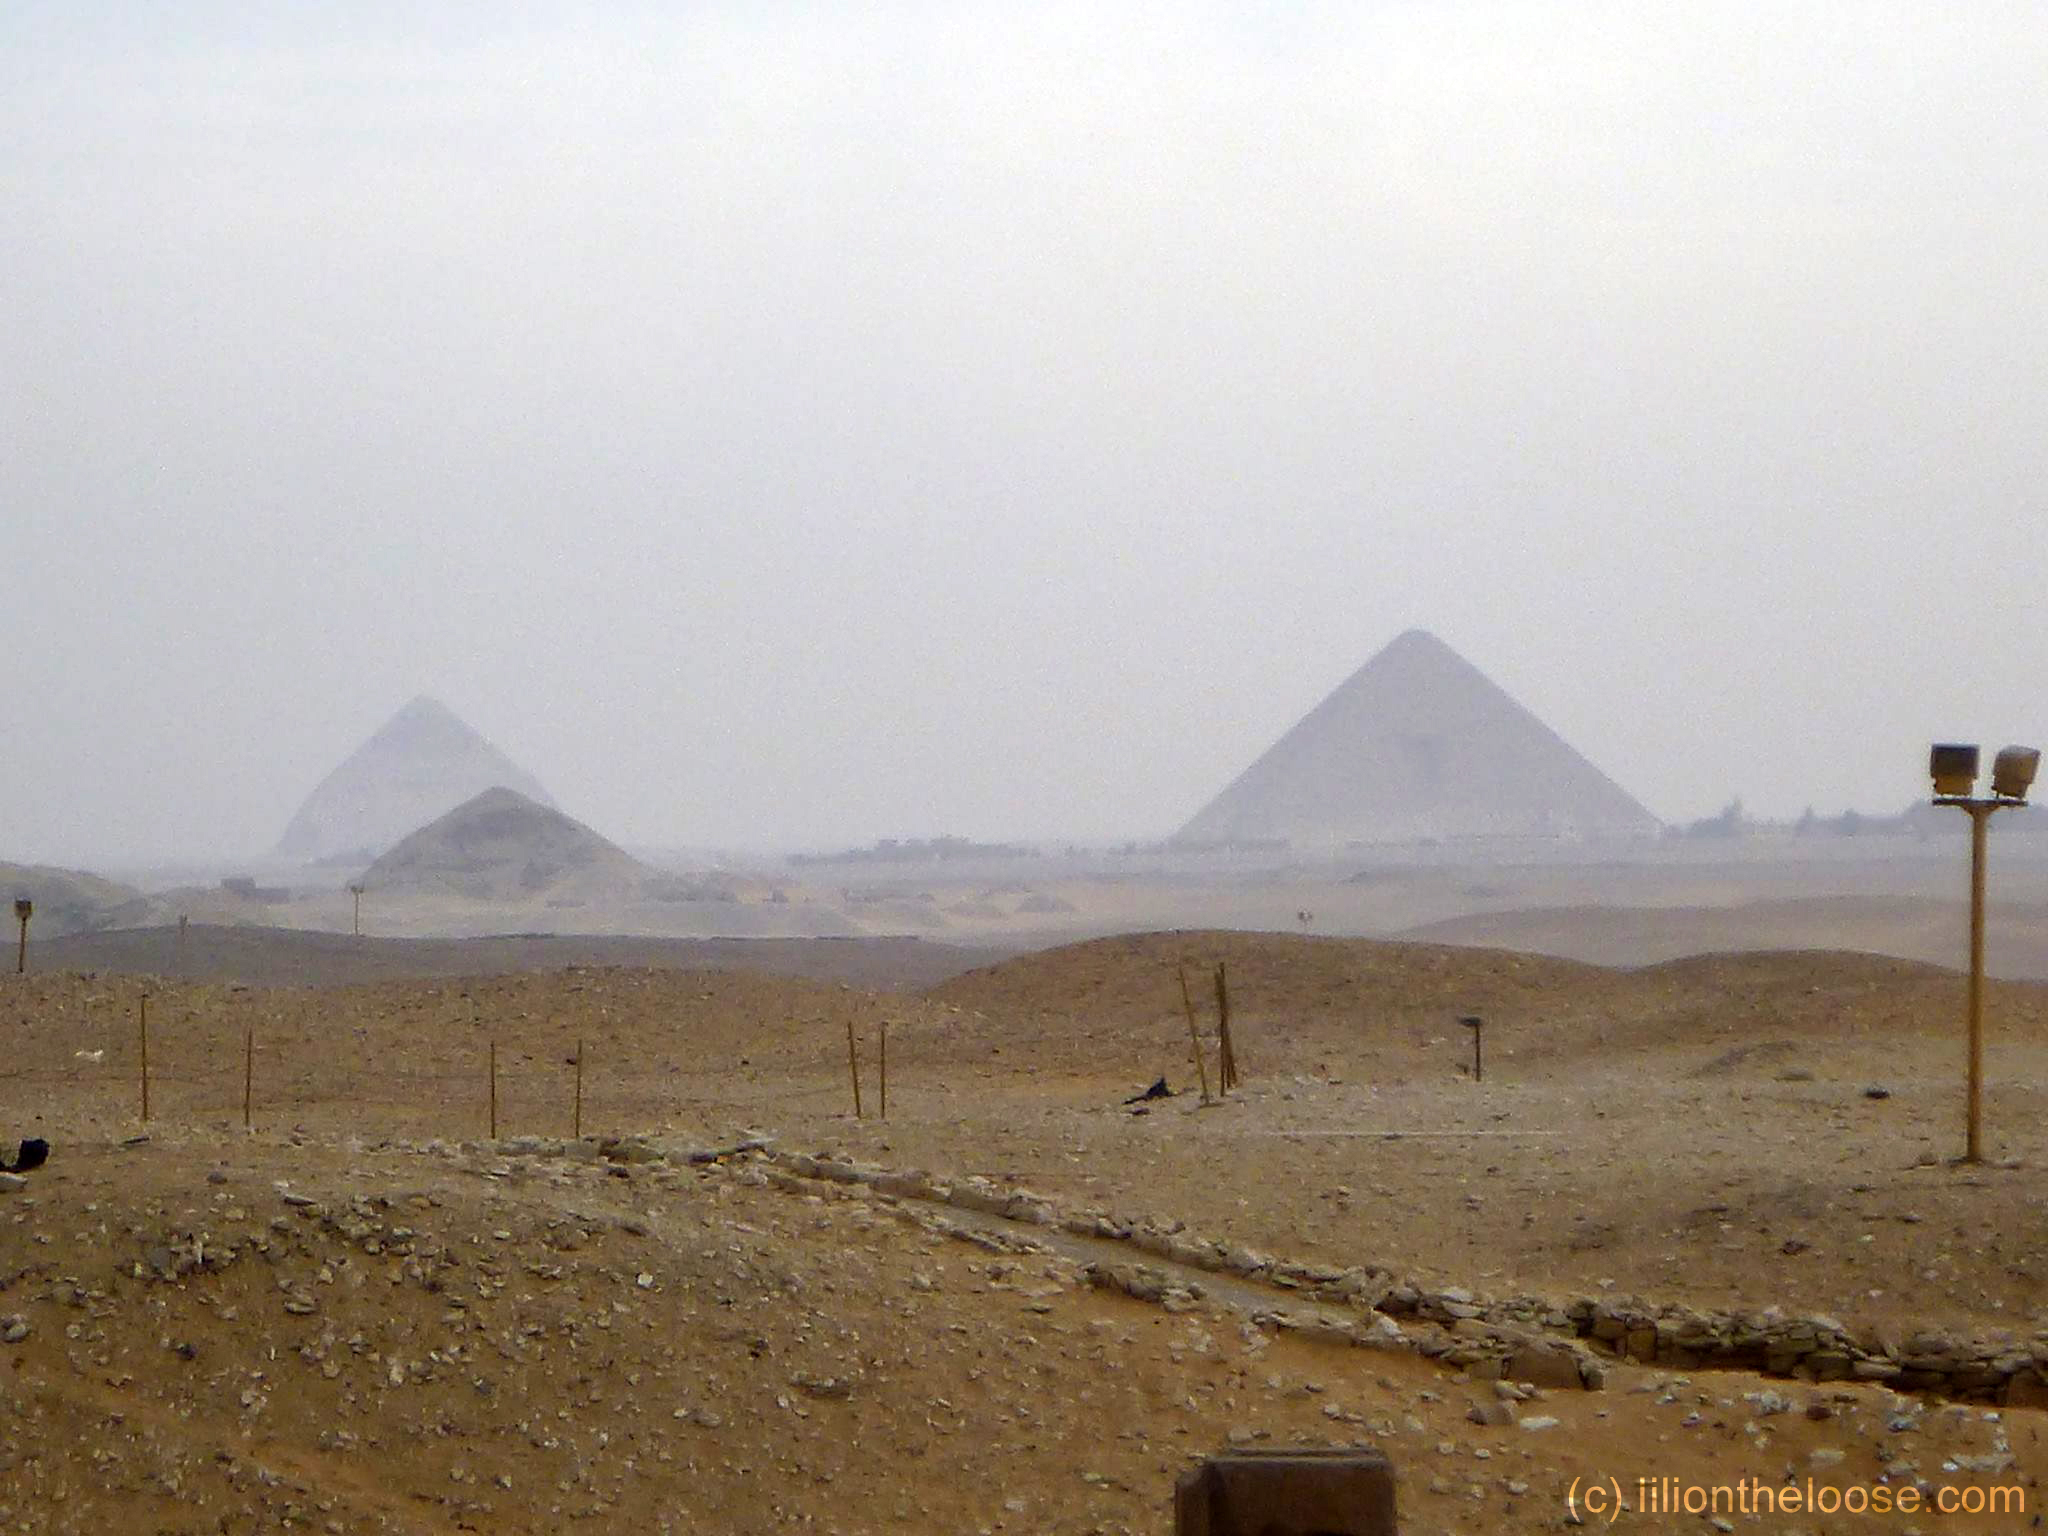 It seemed like it was long ago that I was in the Red Pyramid, but it was only that morning!